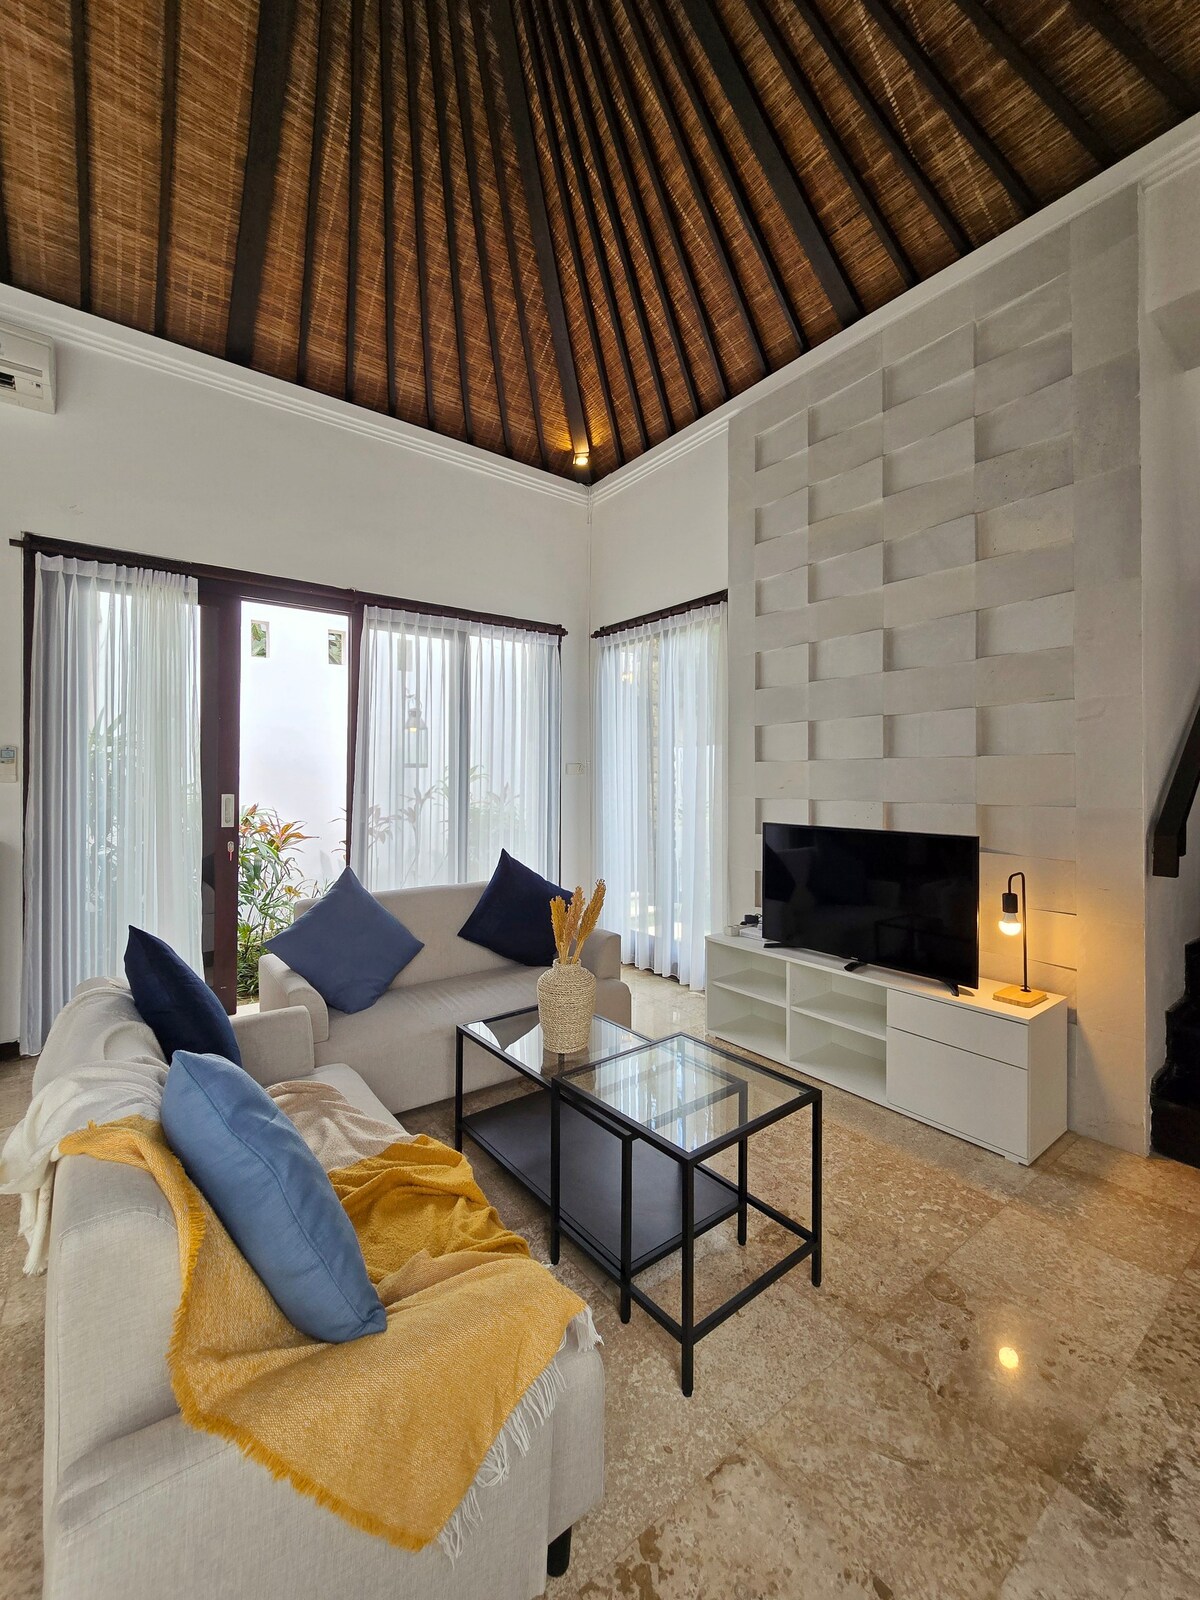 Tropical Villa, Secluded Bliss in South Kuta